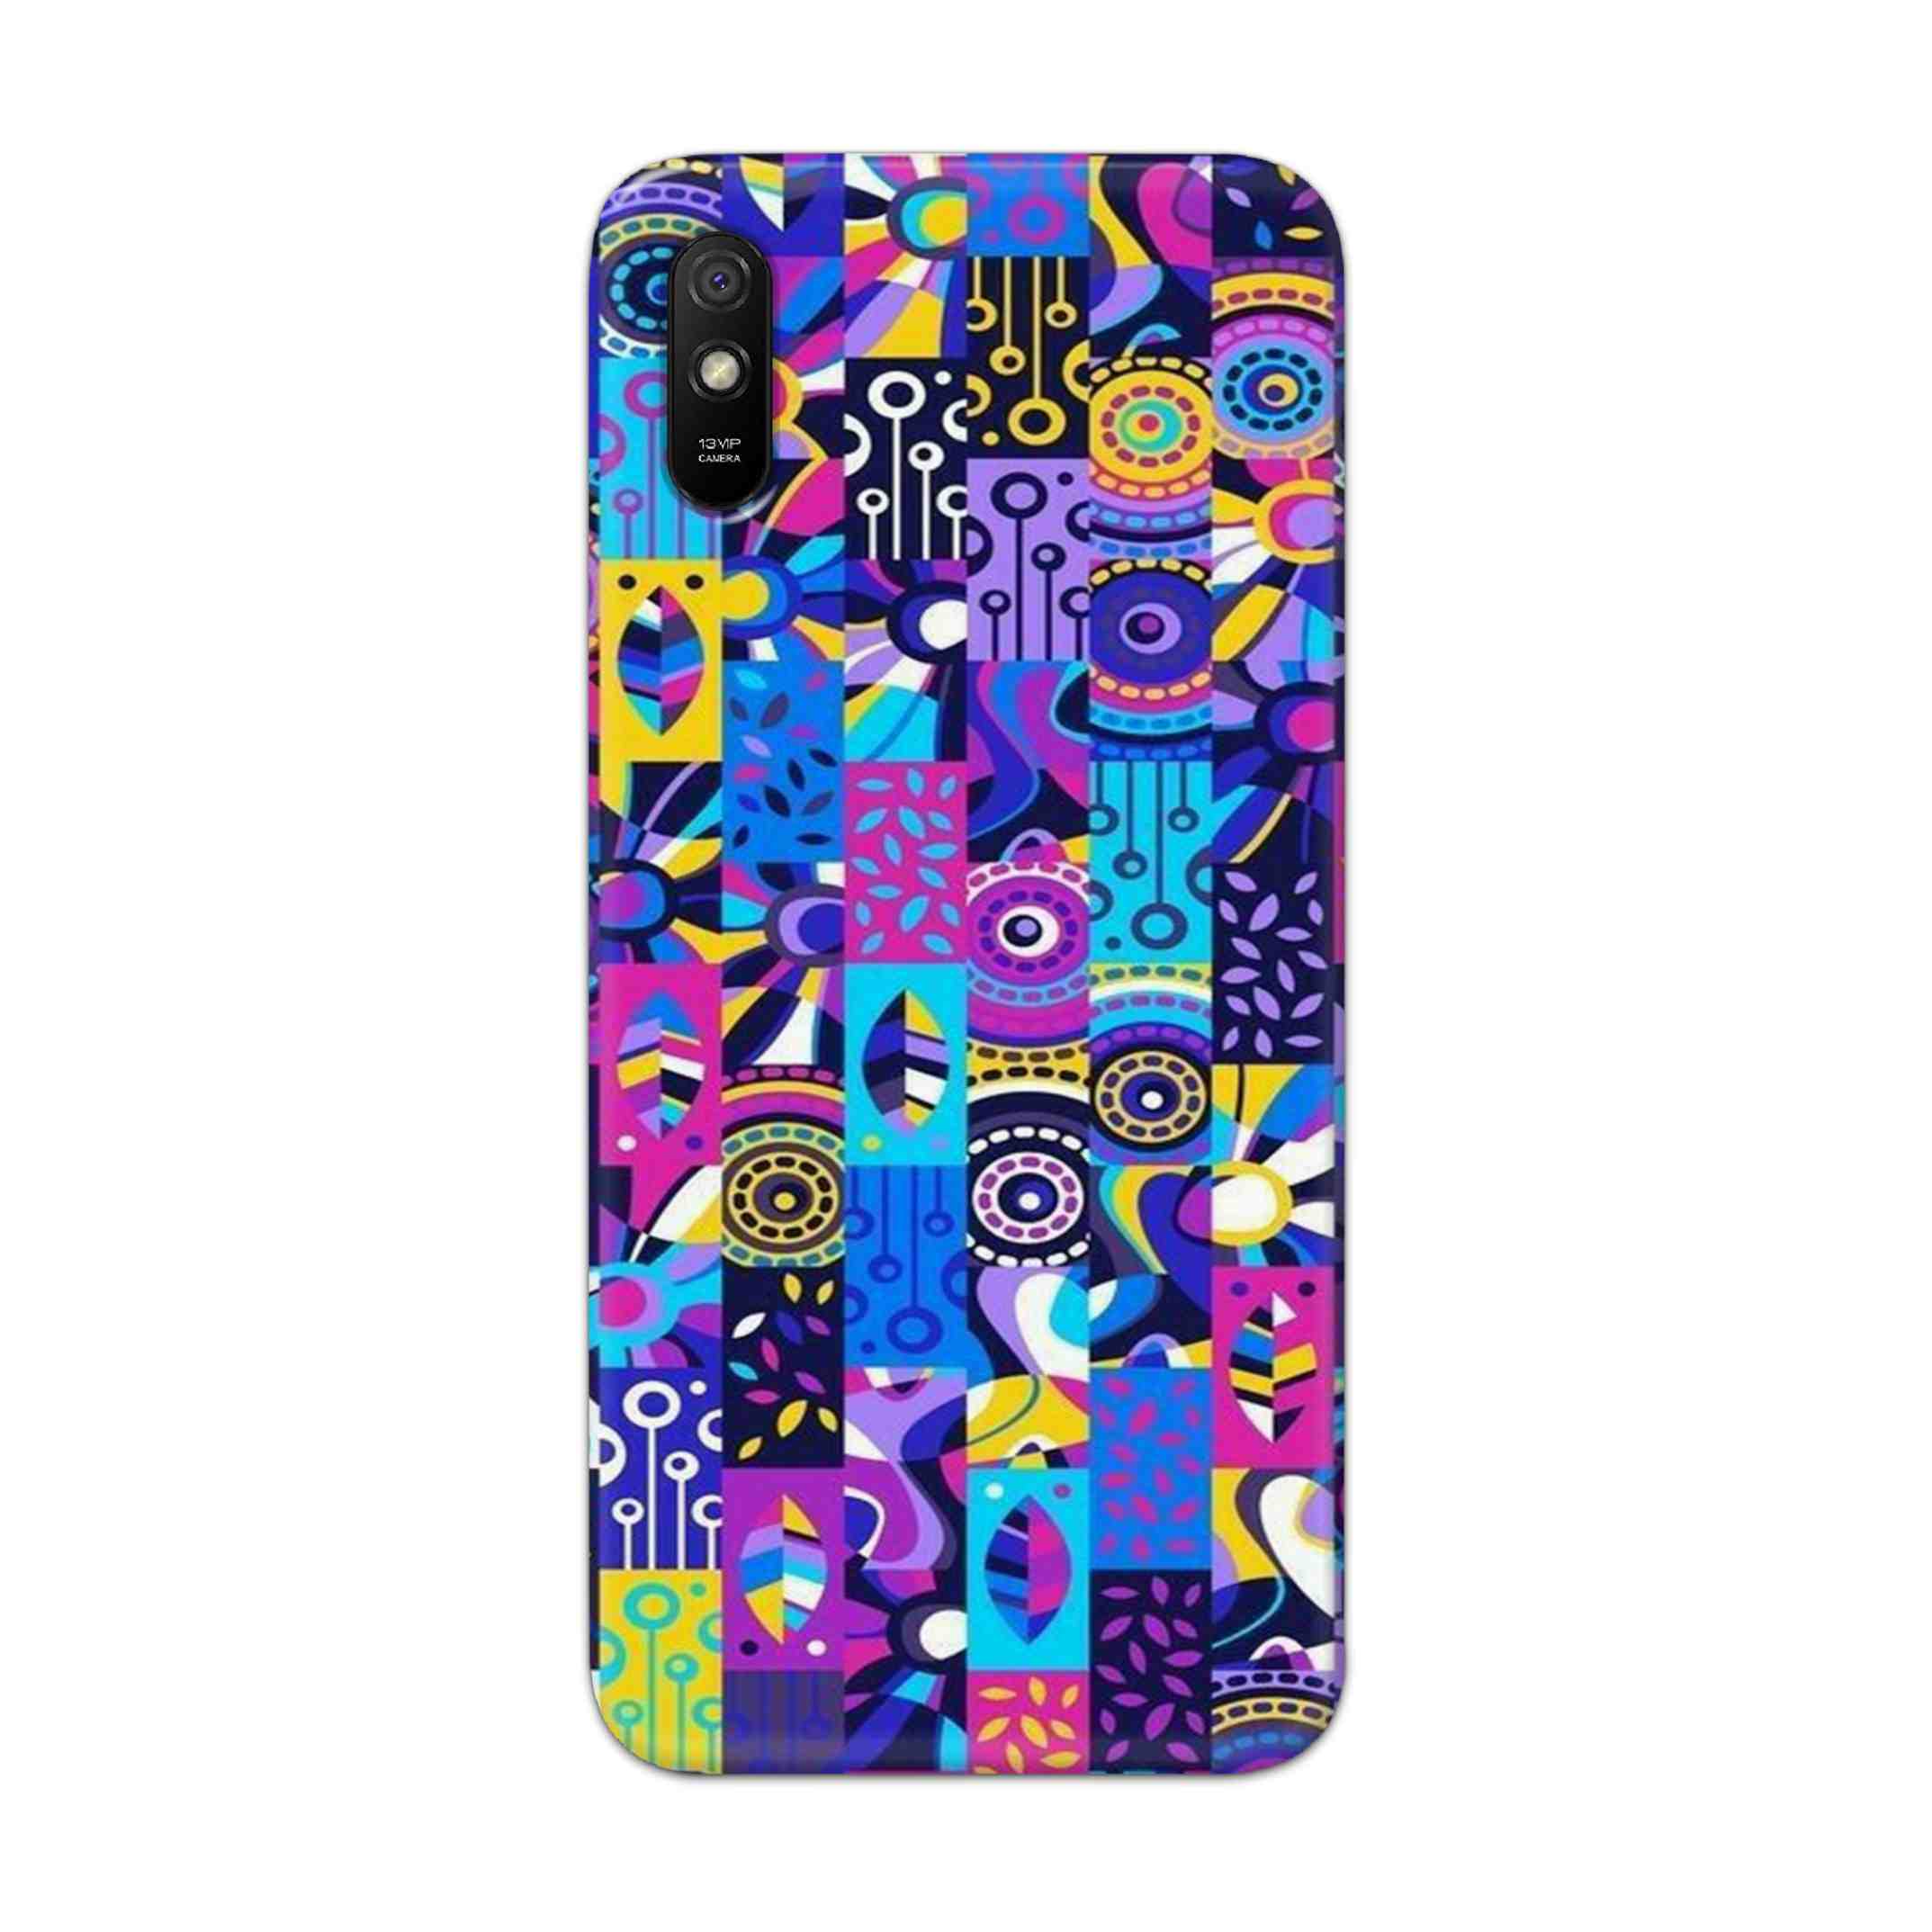 Buy Rainbow Art Hard Back Mobile Phone Case Cover For Redmi 9A Online